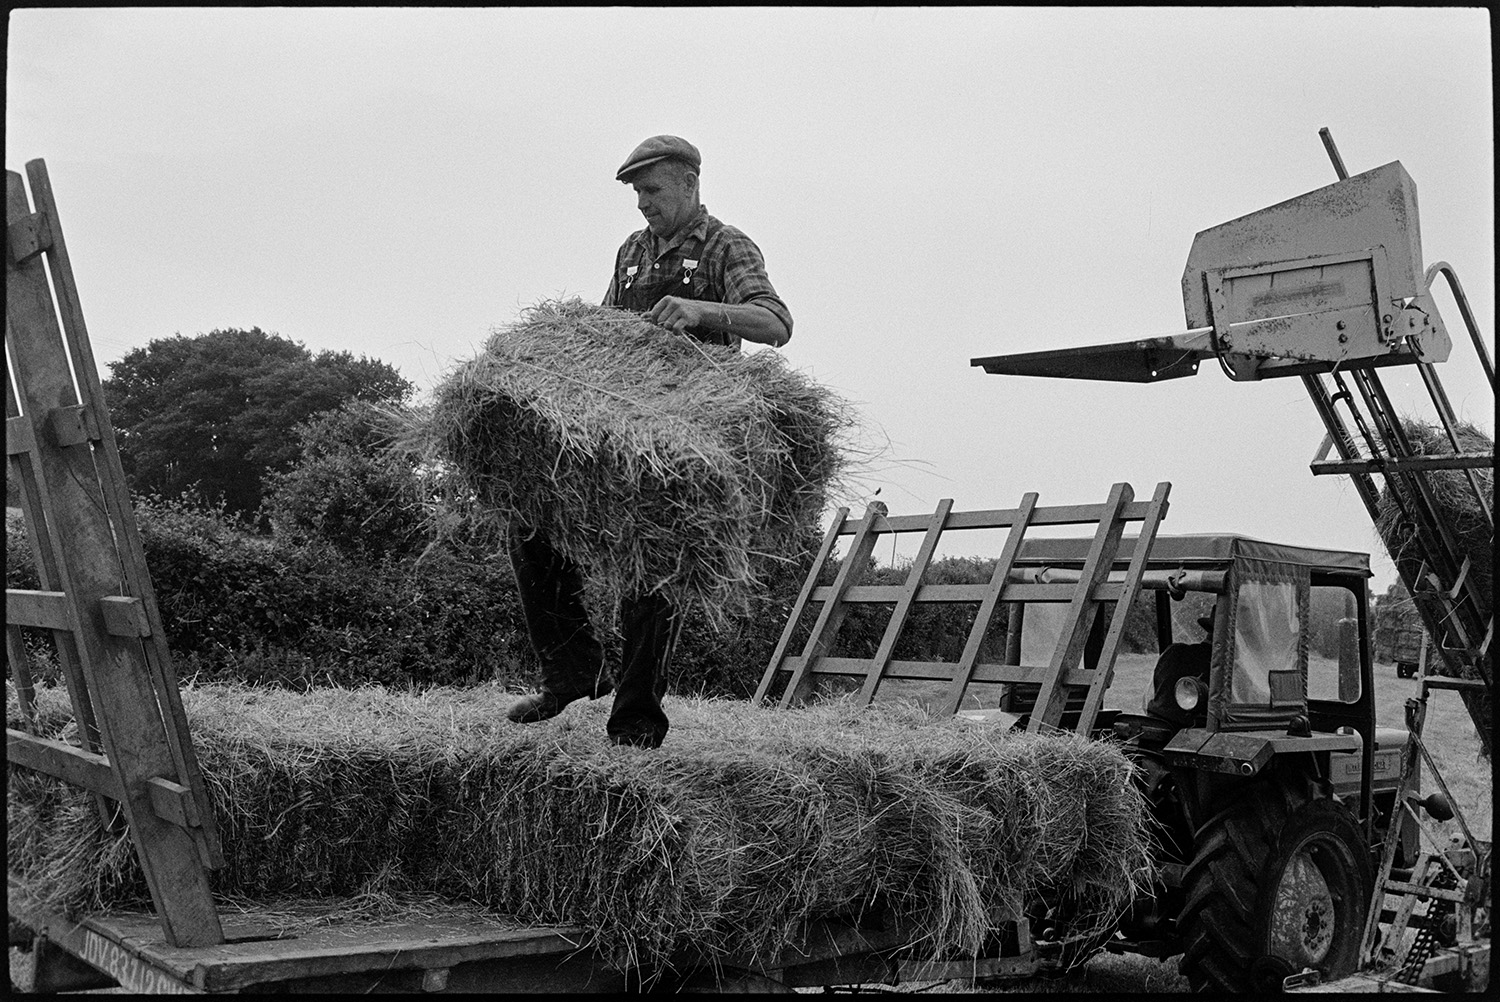 Haymaking, tractor and trailer coming back to farm past ancient thatched barn. 
[Mr Oke loading a hay bale onto a trailer in a field at Deckport, Hatherleigh. He is using an elevator, next to the trailer, to lift the bales.]